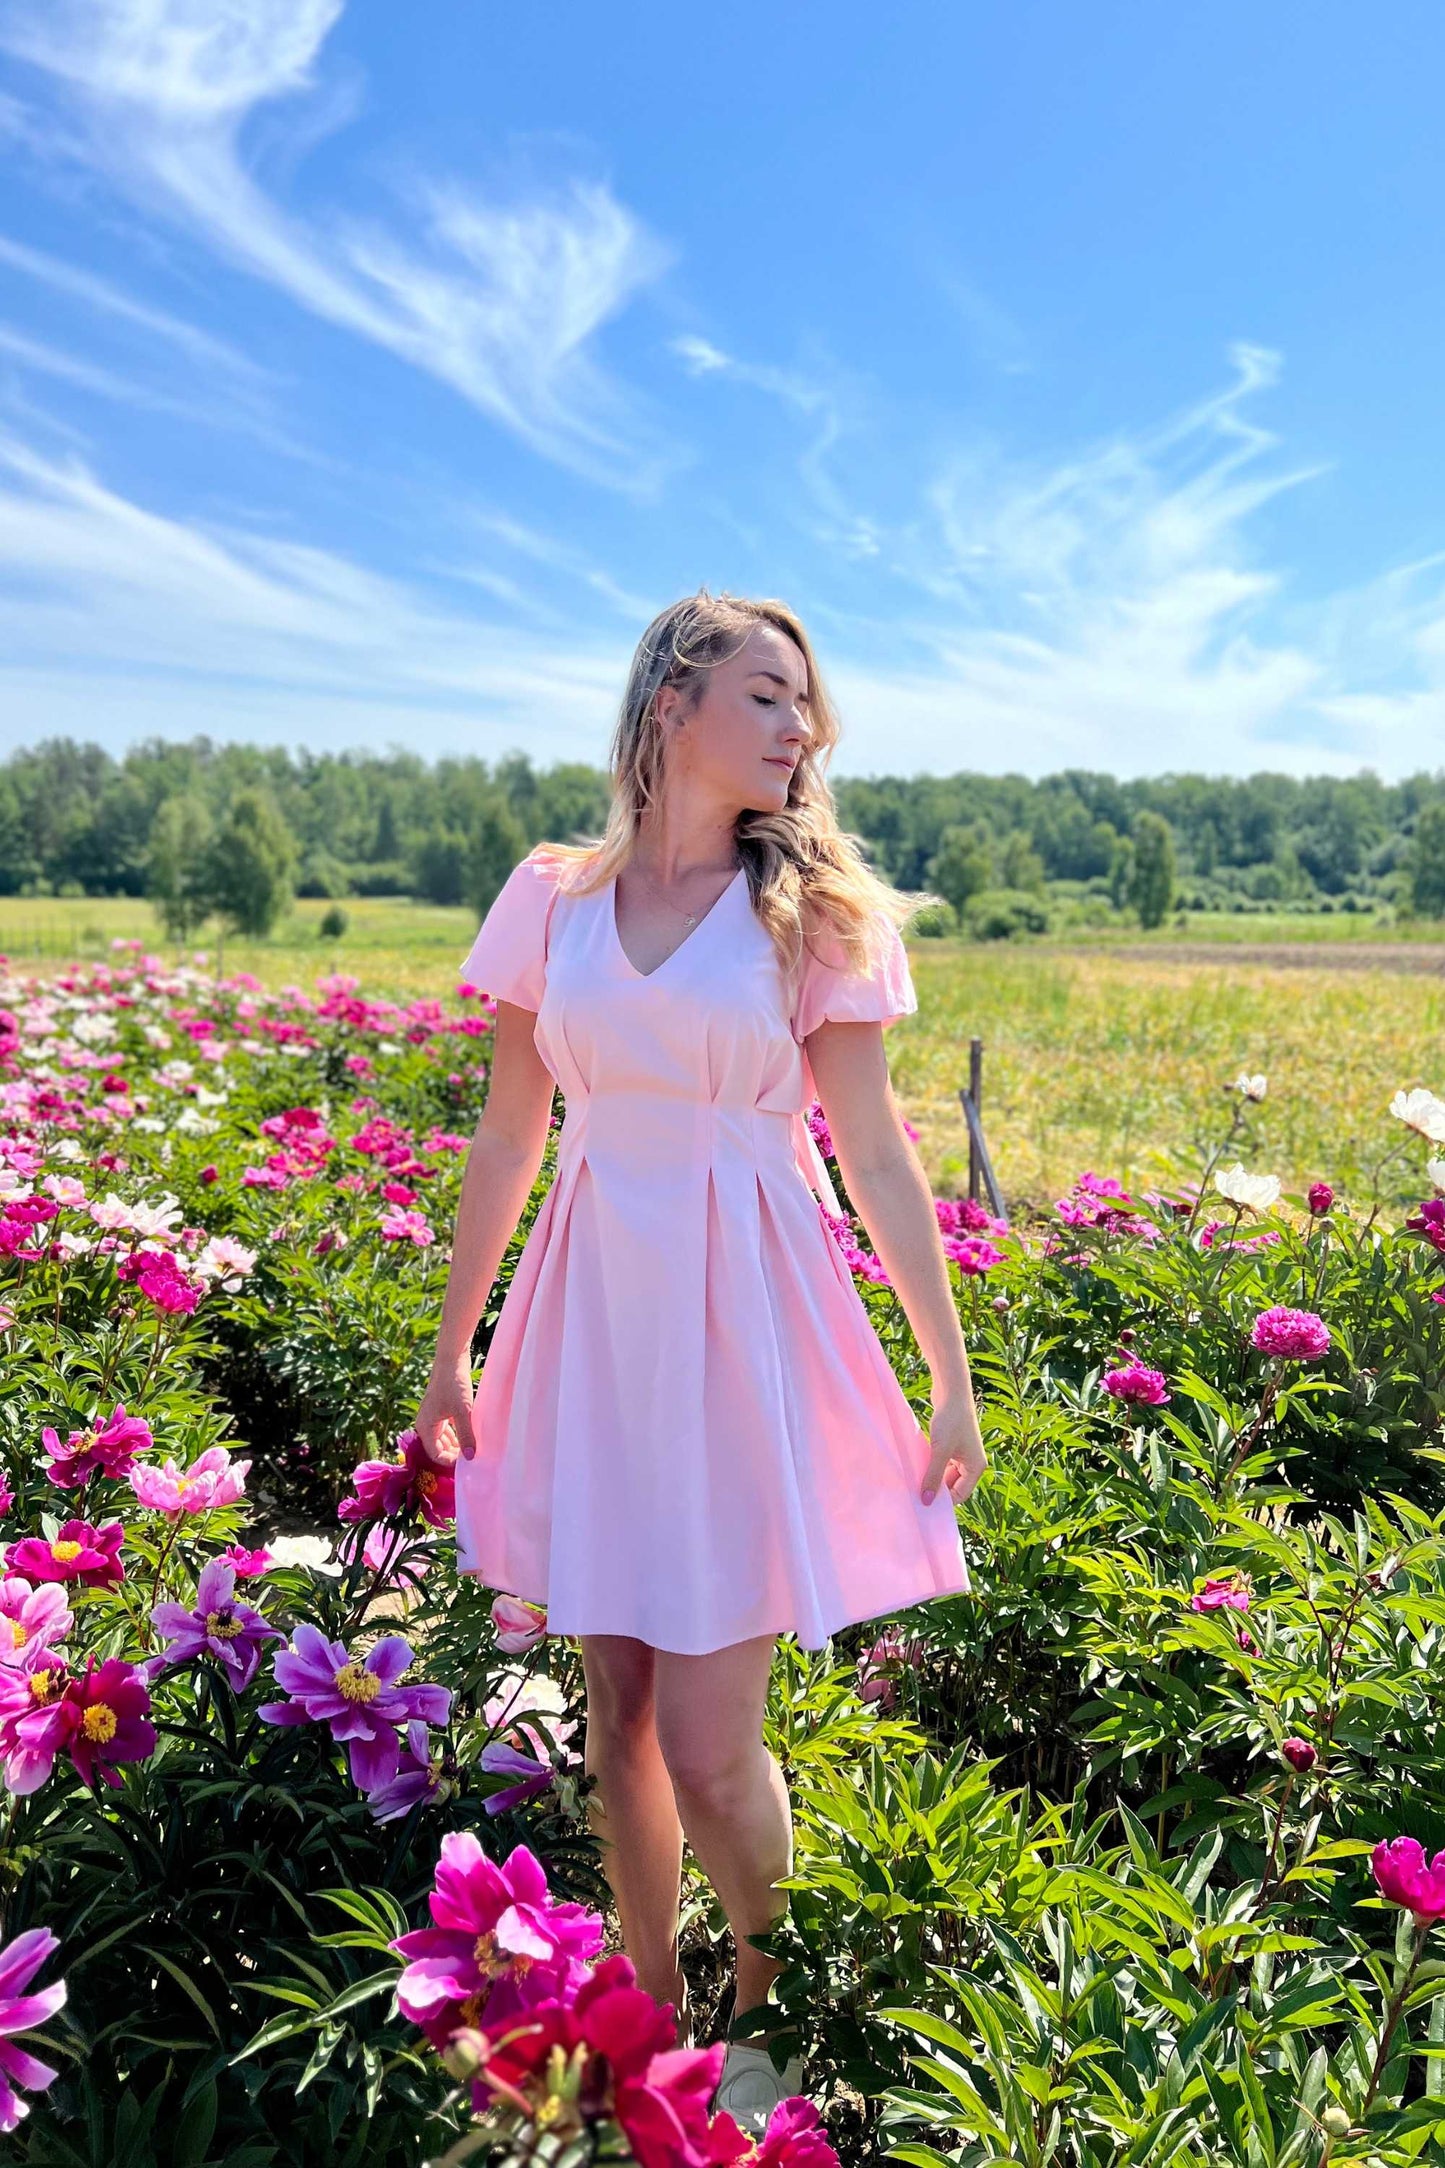 Soft pink mini dress with balloon sleeves and pockets